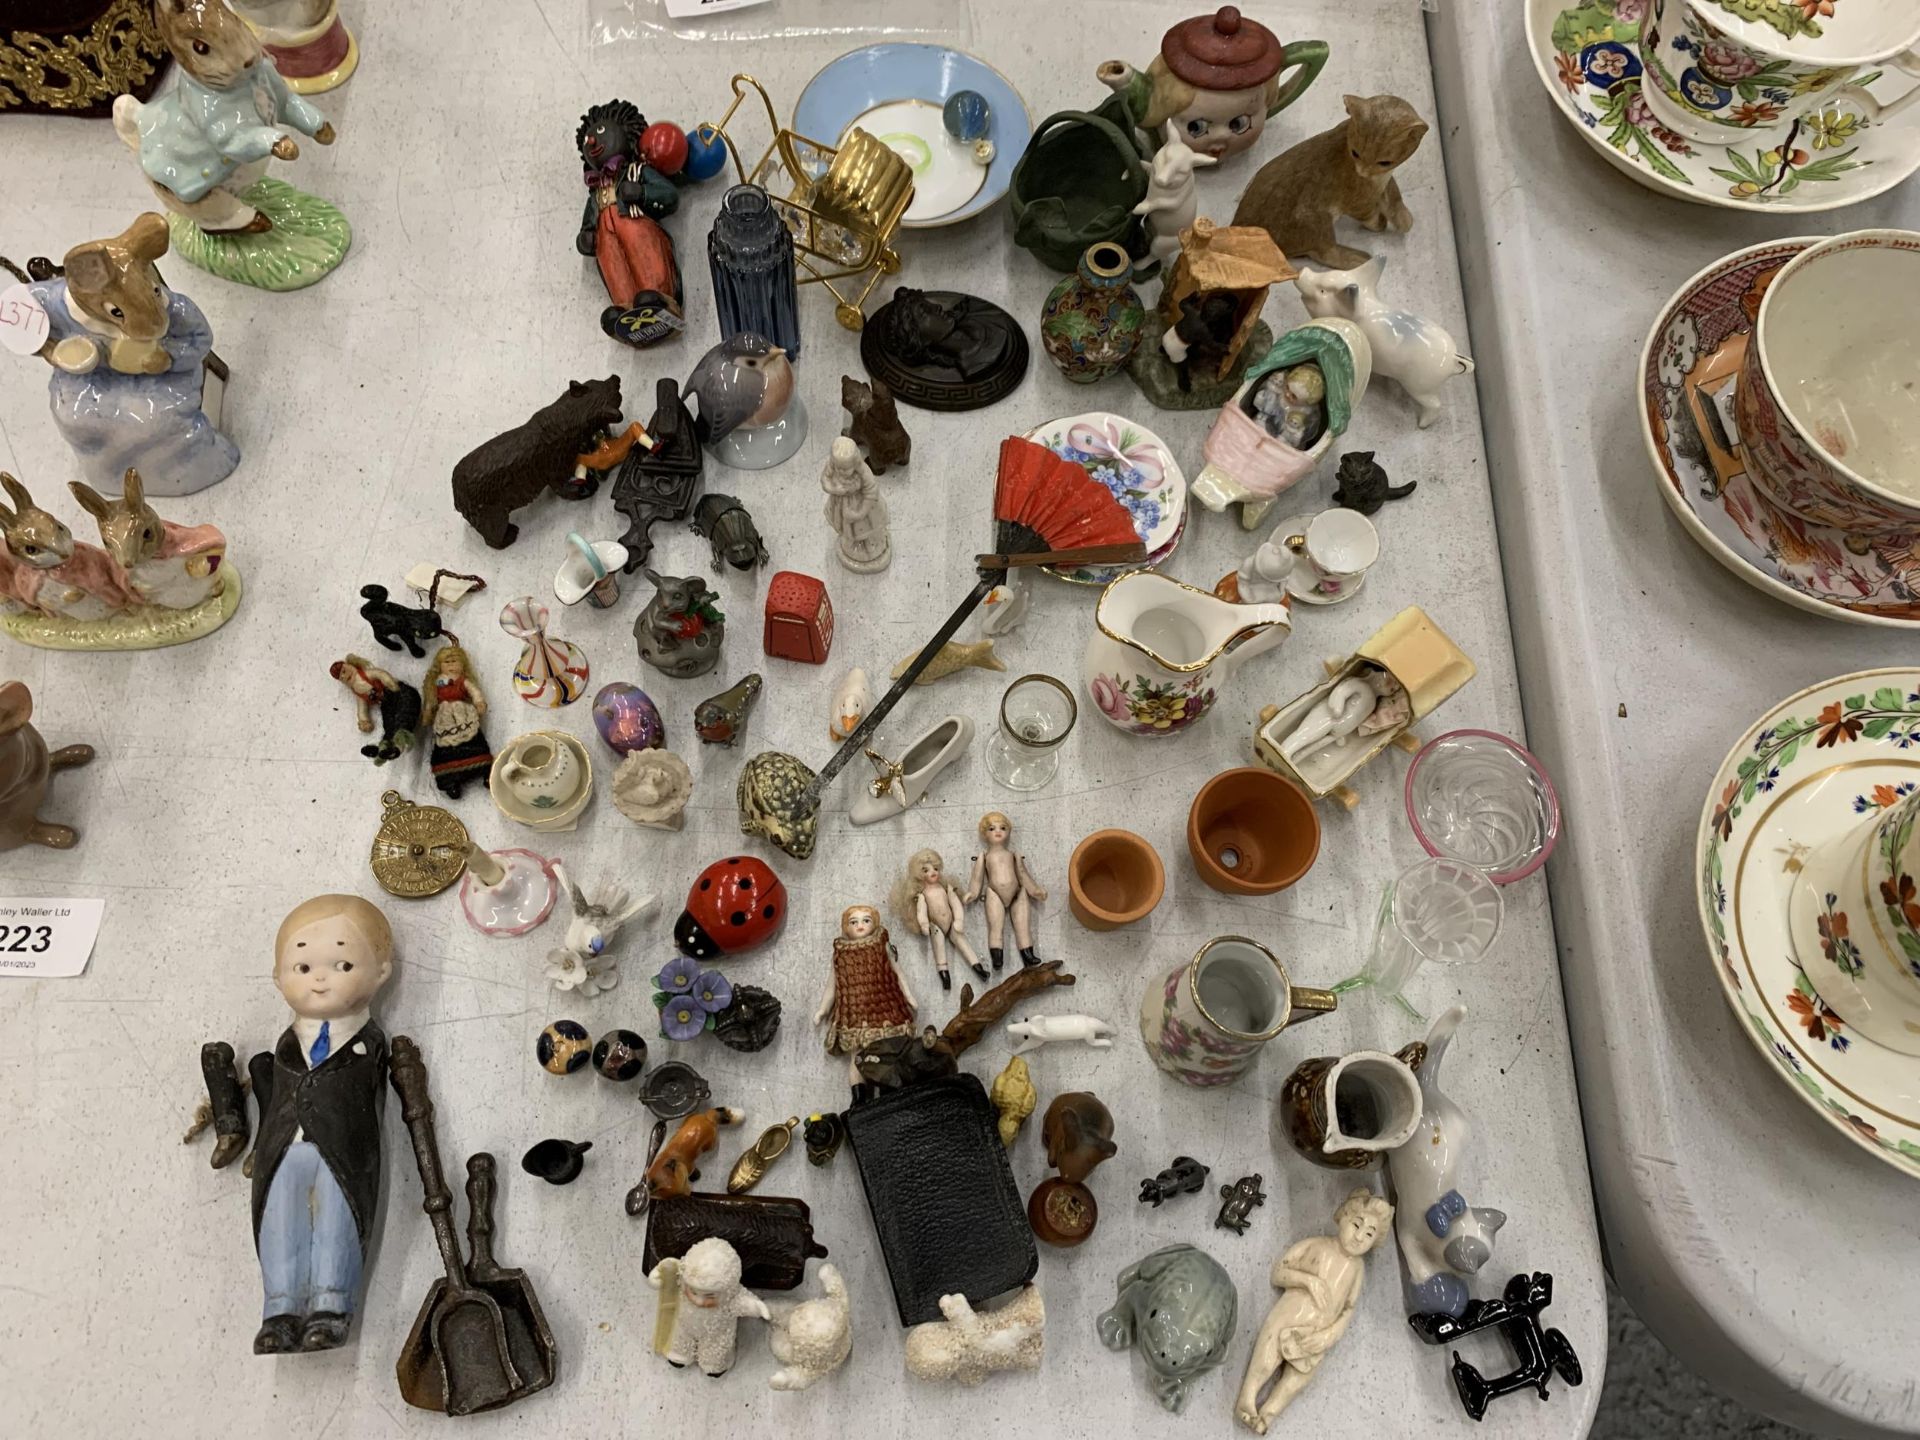 ACOLLECTION OF MINIATURE ITEMS TO INCLUDE FIGURES, ANIMALS, PLATES, JUGS, ETC